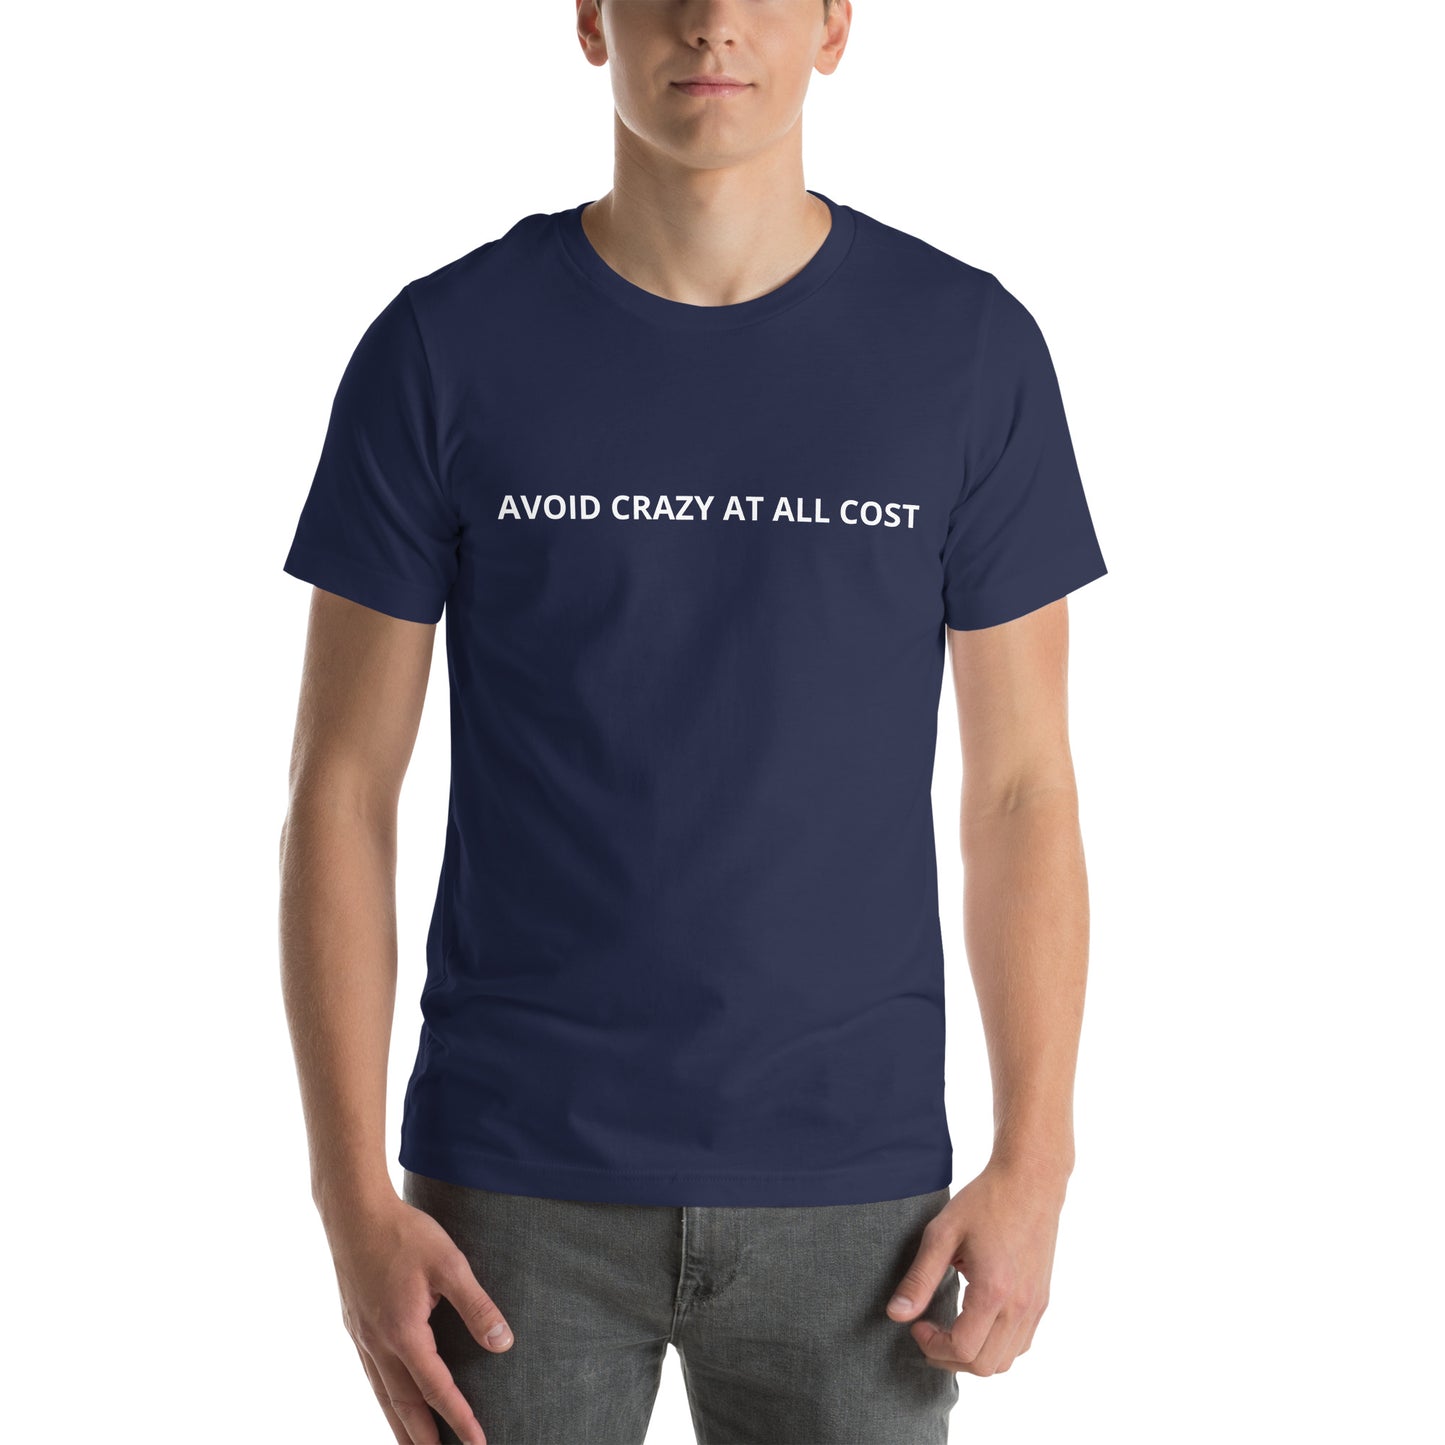 AVOID CRAZY AT ALL COST  Unisex t-shirt